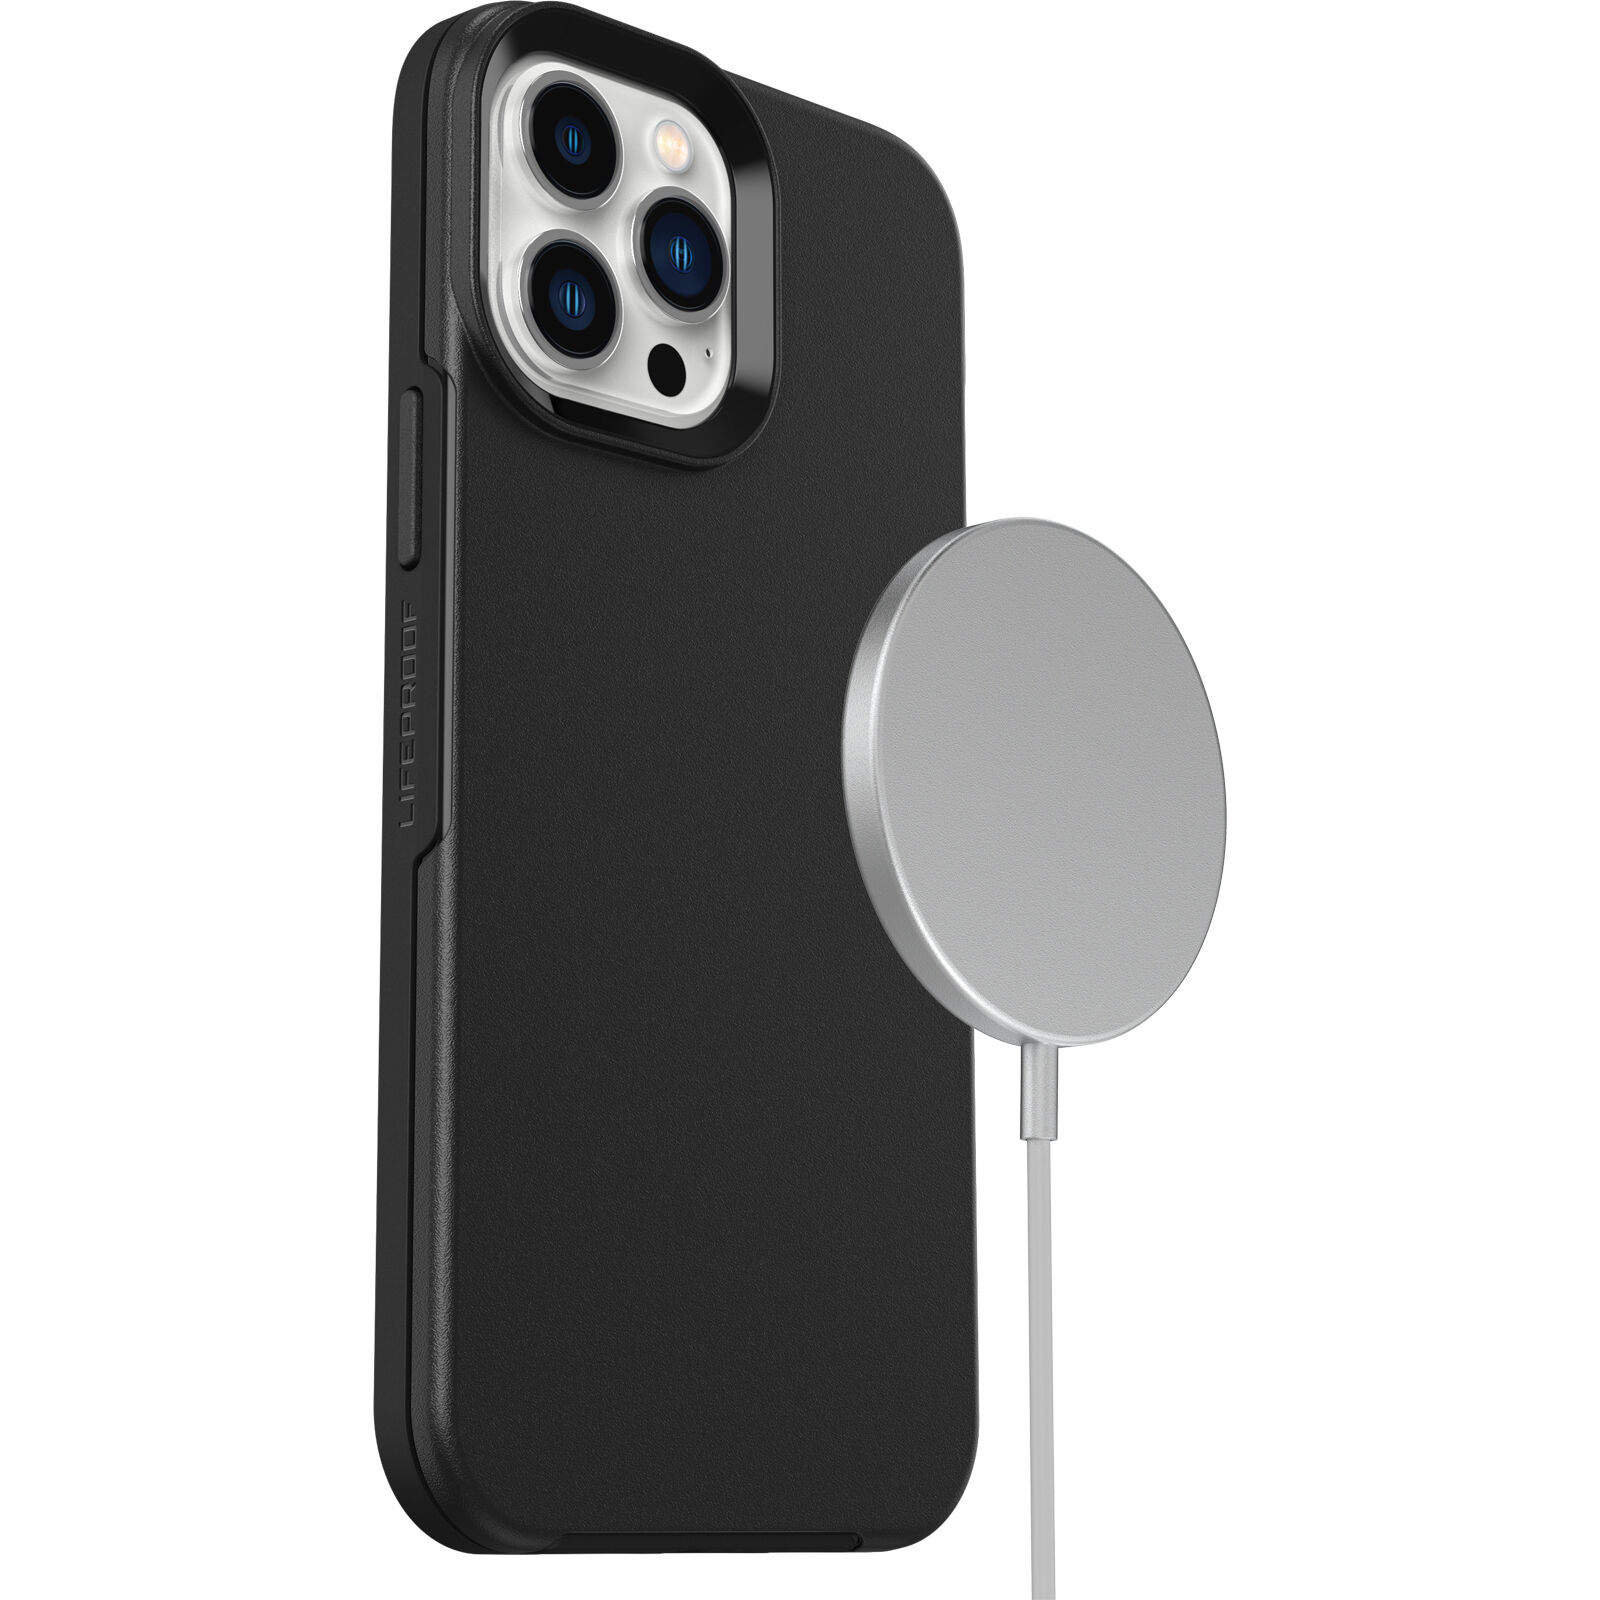 SEE iPhone 13 Pro Max case with MagSafe is made for maximum 